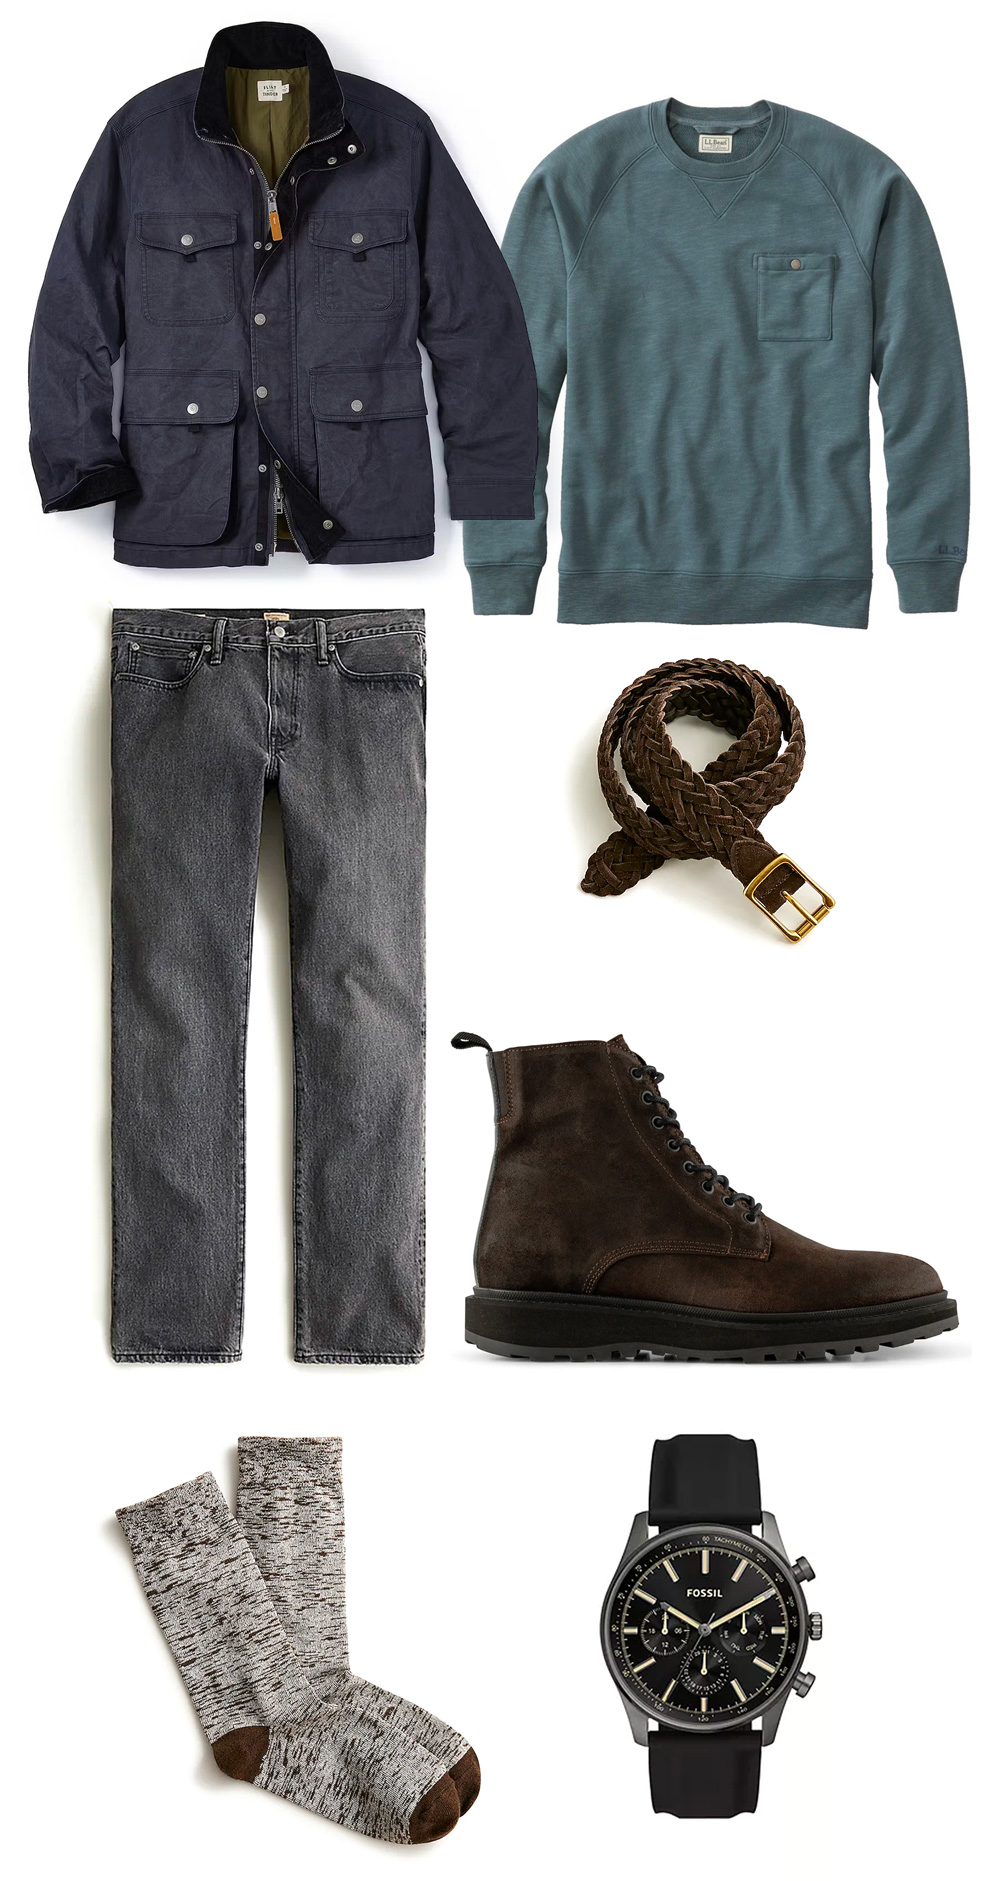 men's casual fall outfit with navy field jacket, teal sweatshirt, braided belt, suede boots, faded black jeans, black watch and gray socks